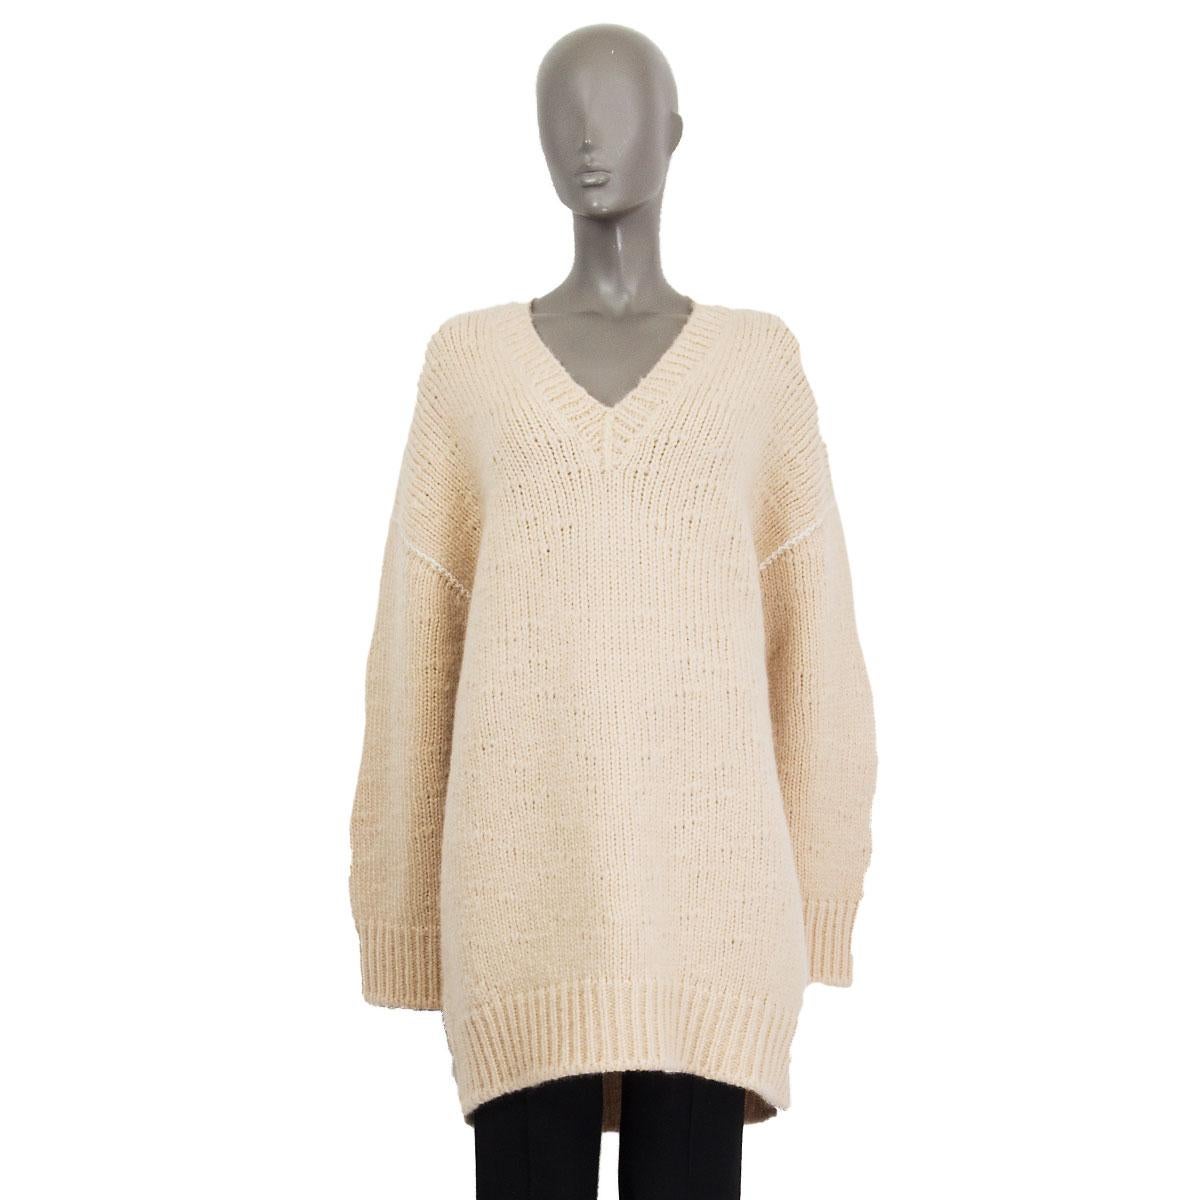 100% authentic Céline v-neck oversized chunky knit sweater in cream mohair (52%) and wool (48%). Stitching details on hem in off-white linen (75%) and silk (25%). Has been worn once  and is in excellent condition. 

Tag Size S
Size S
Shoulder Width